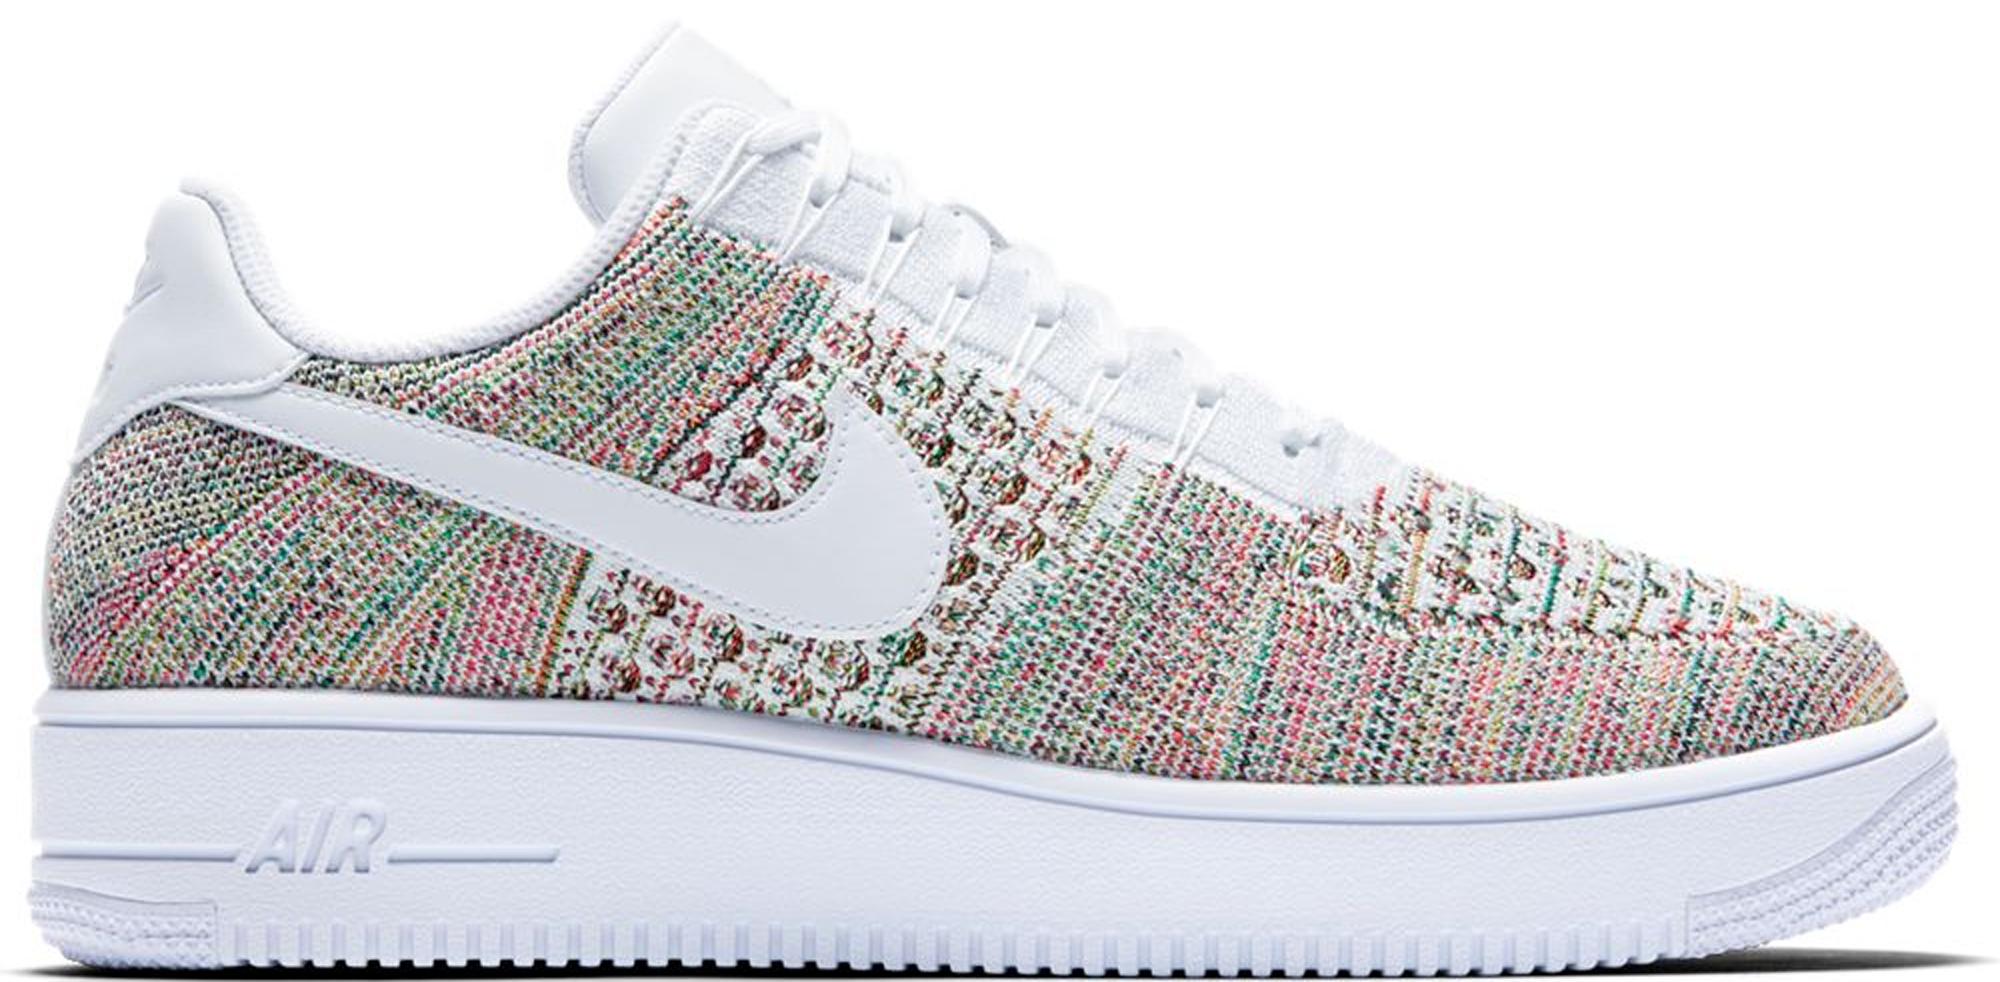 Nike Air Force 1 Ultra Flyknit Color 817419-701